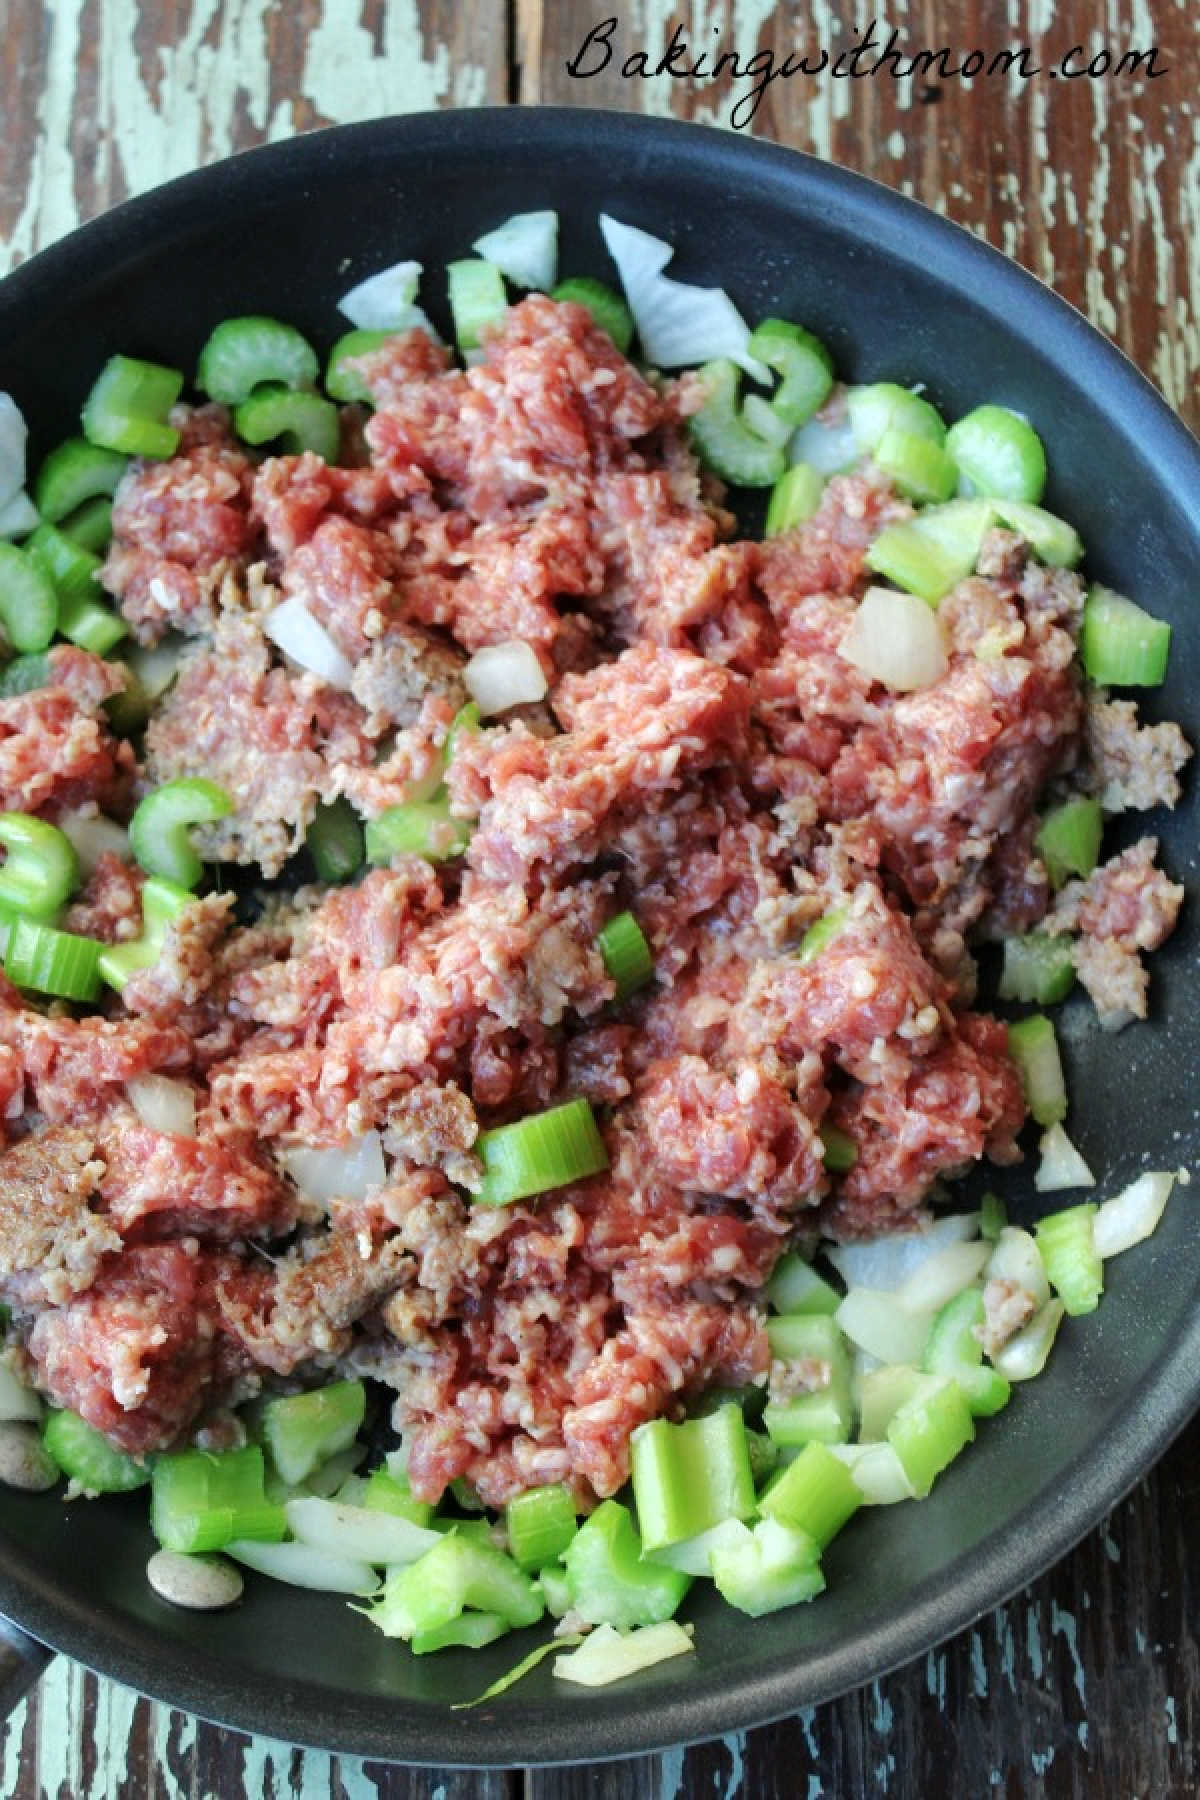 Sausage, celery and onion in a frying pan.